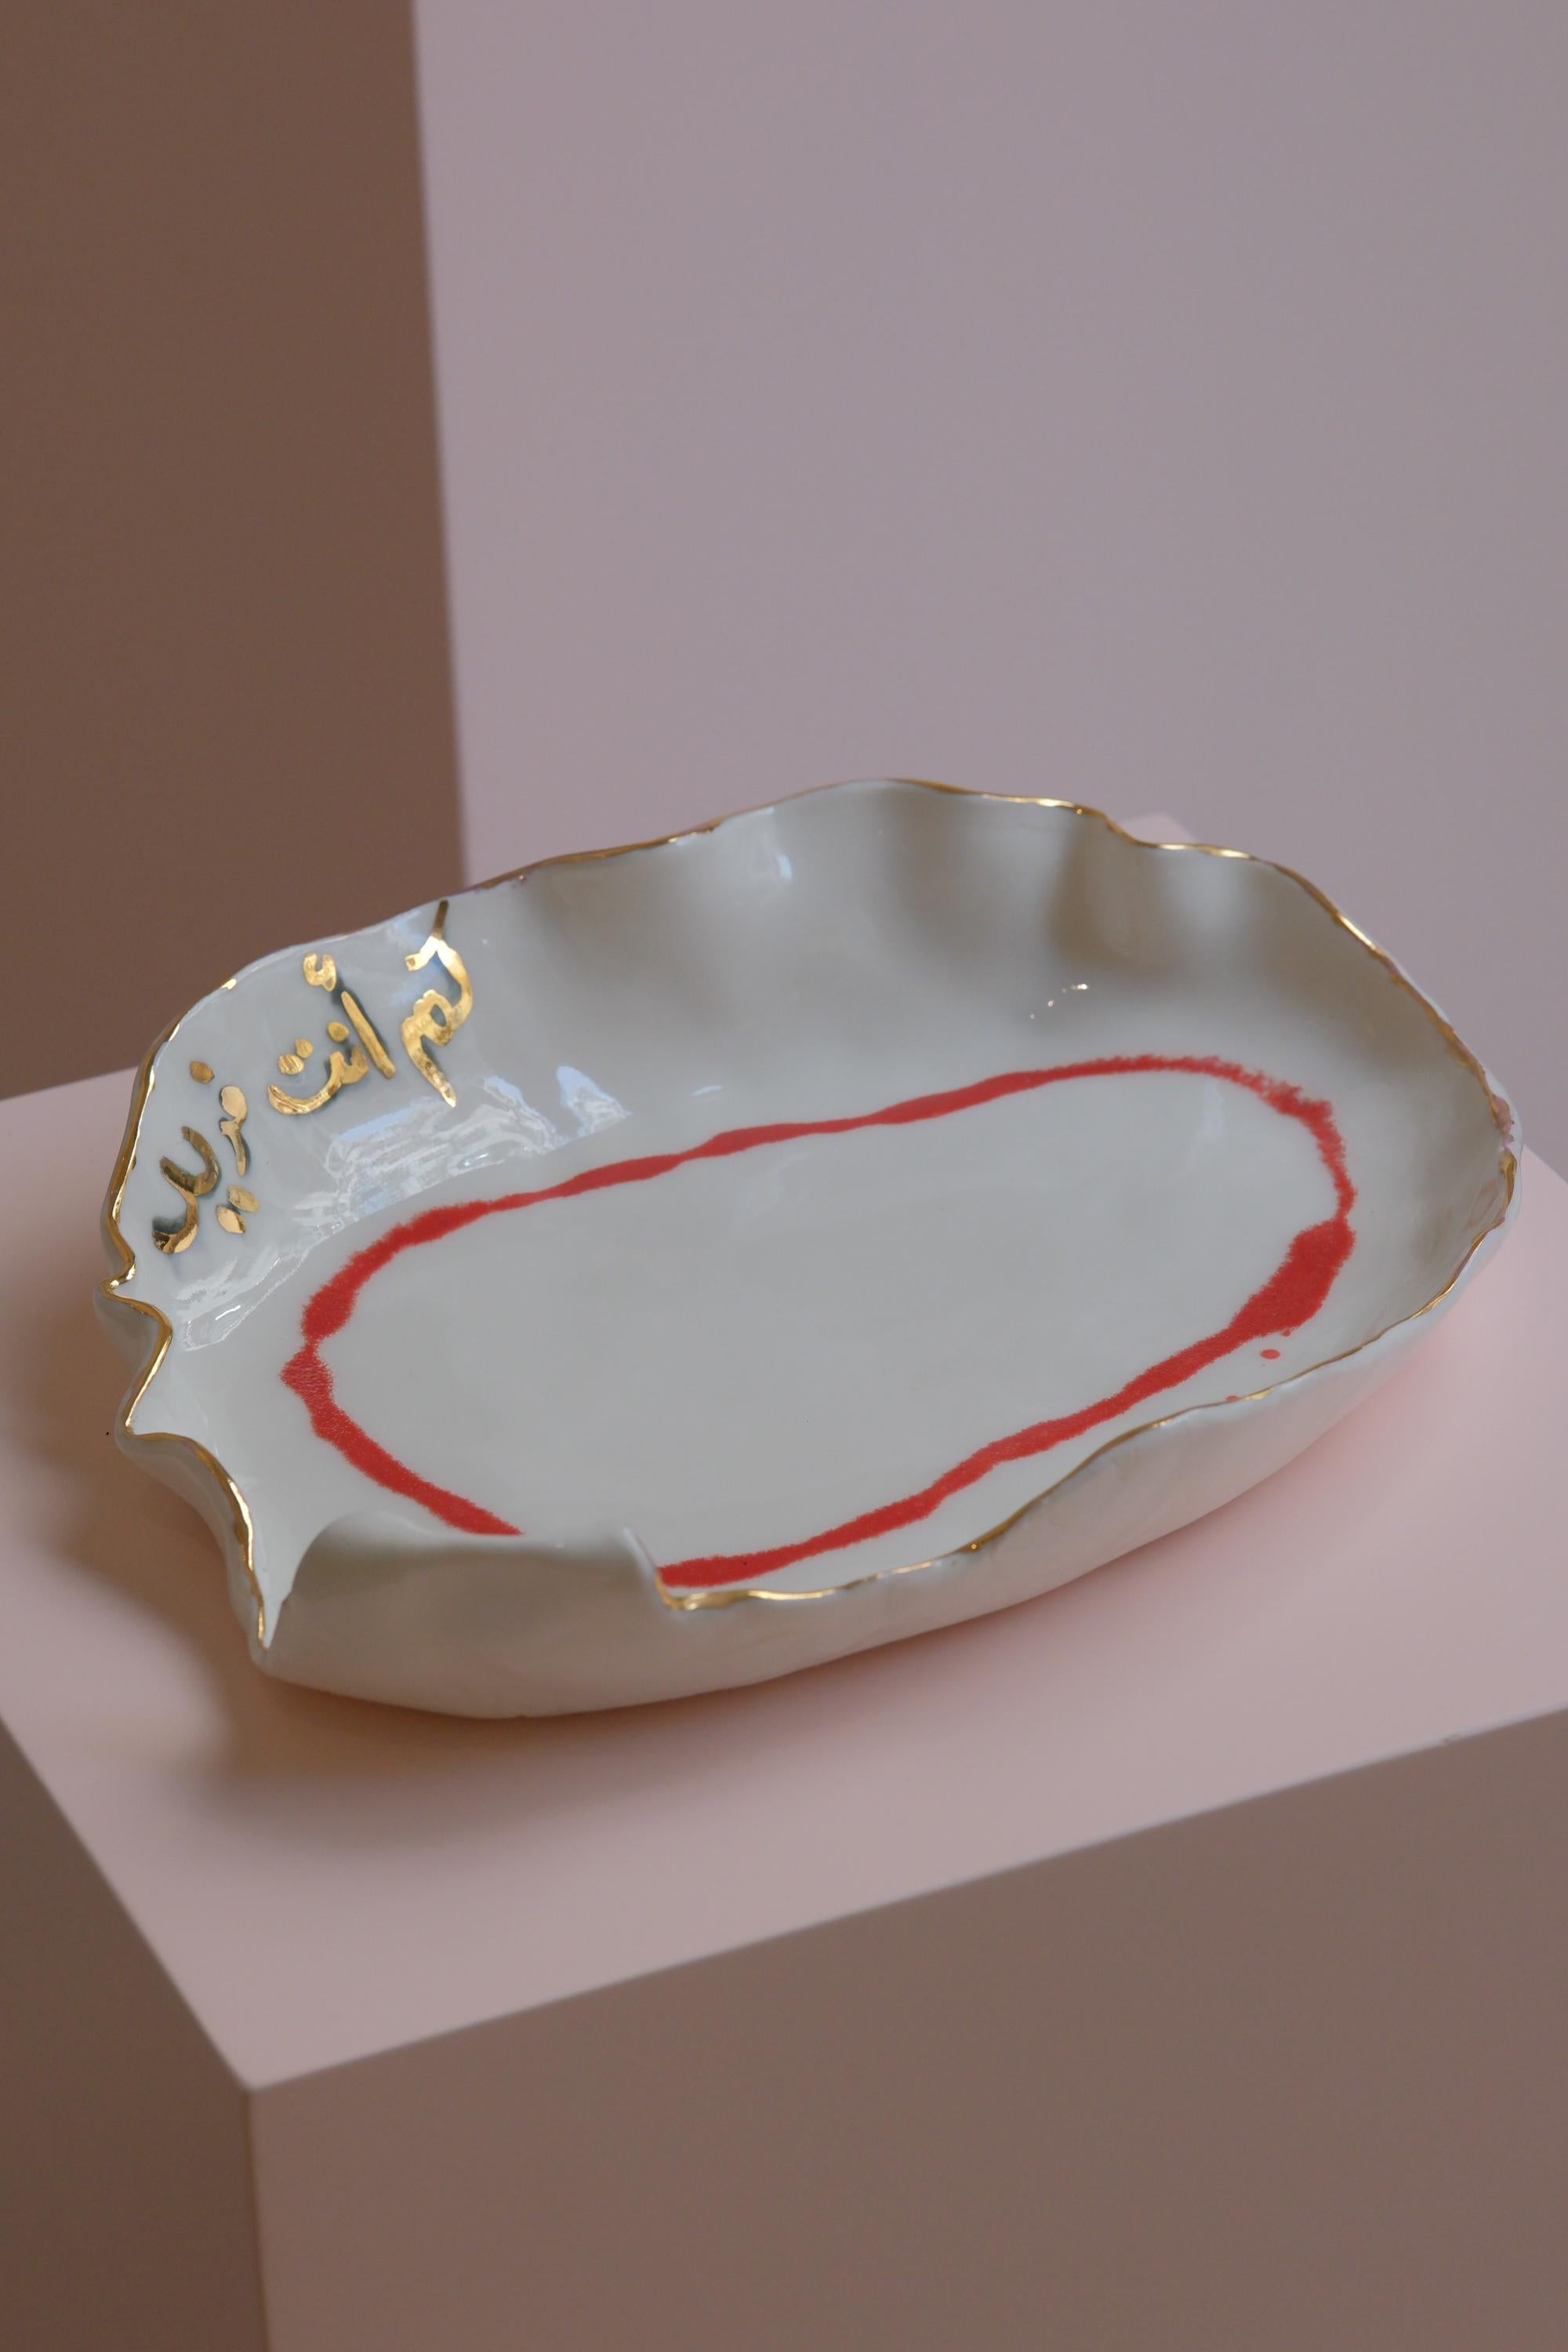 Spanish White Porcelain Serving Plater with Calligraphy by Hania Jneid